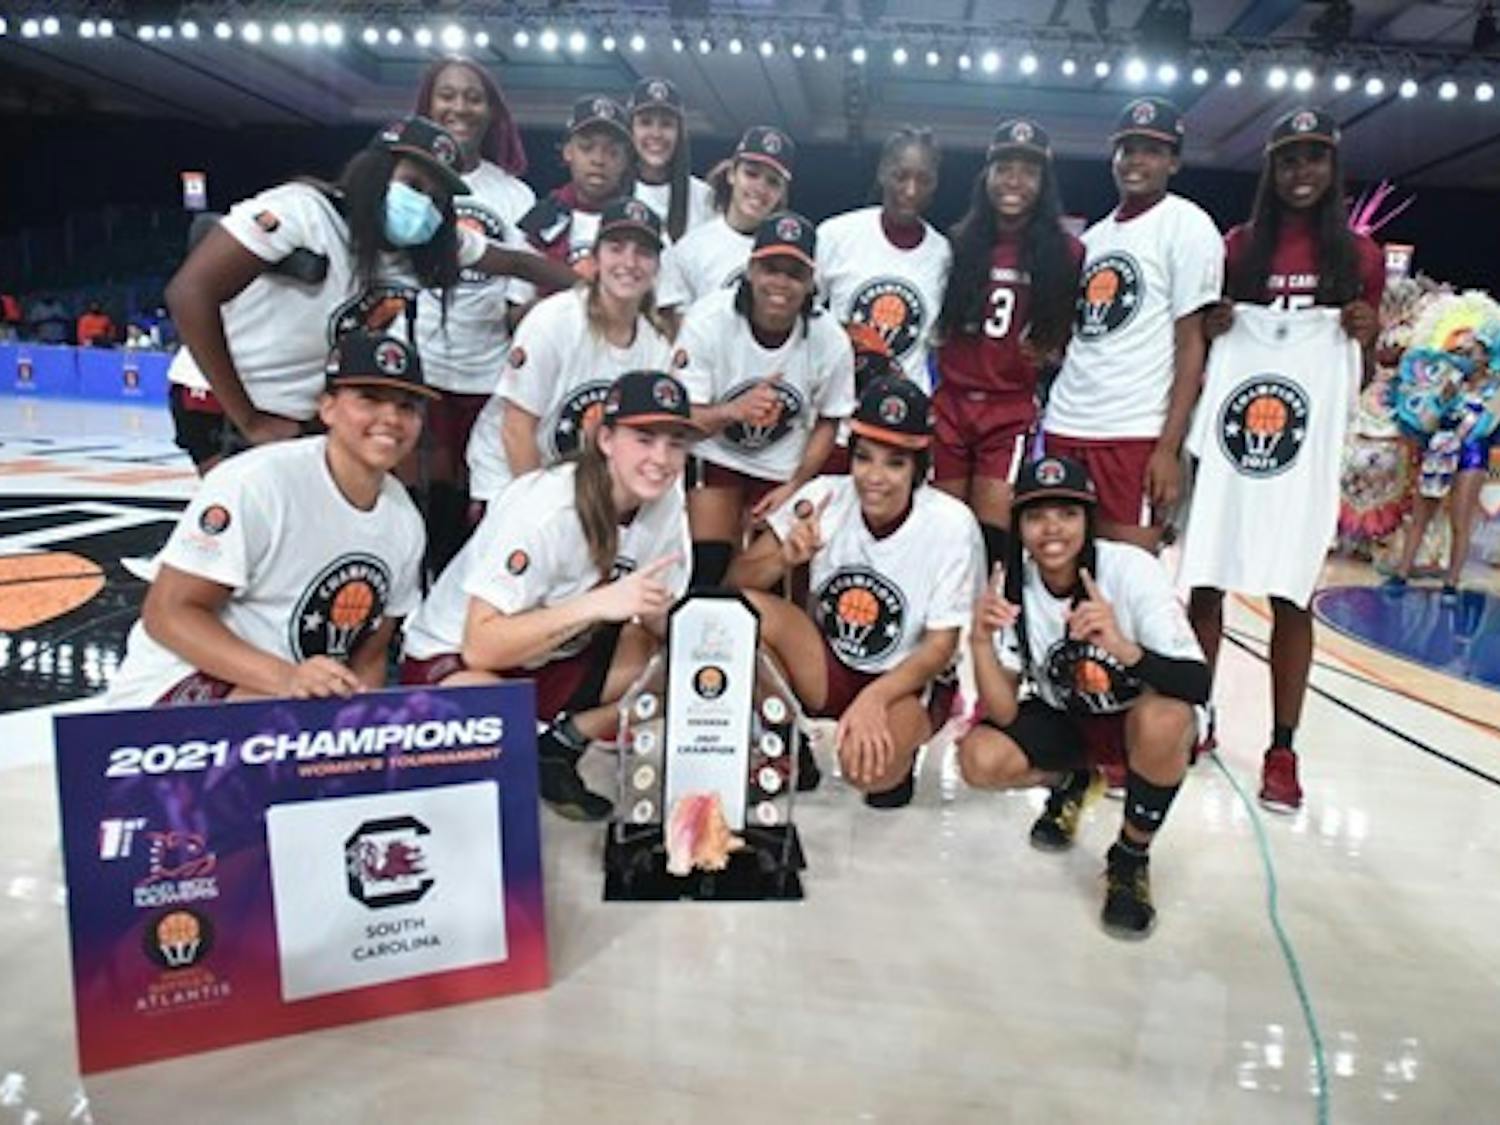 The Gamecock women's basketball team after the Battle 4 Atlantis championship. No. 1 South Carolina beat No. 2 UConn 73-57 in its final matchup of the championship.